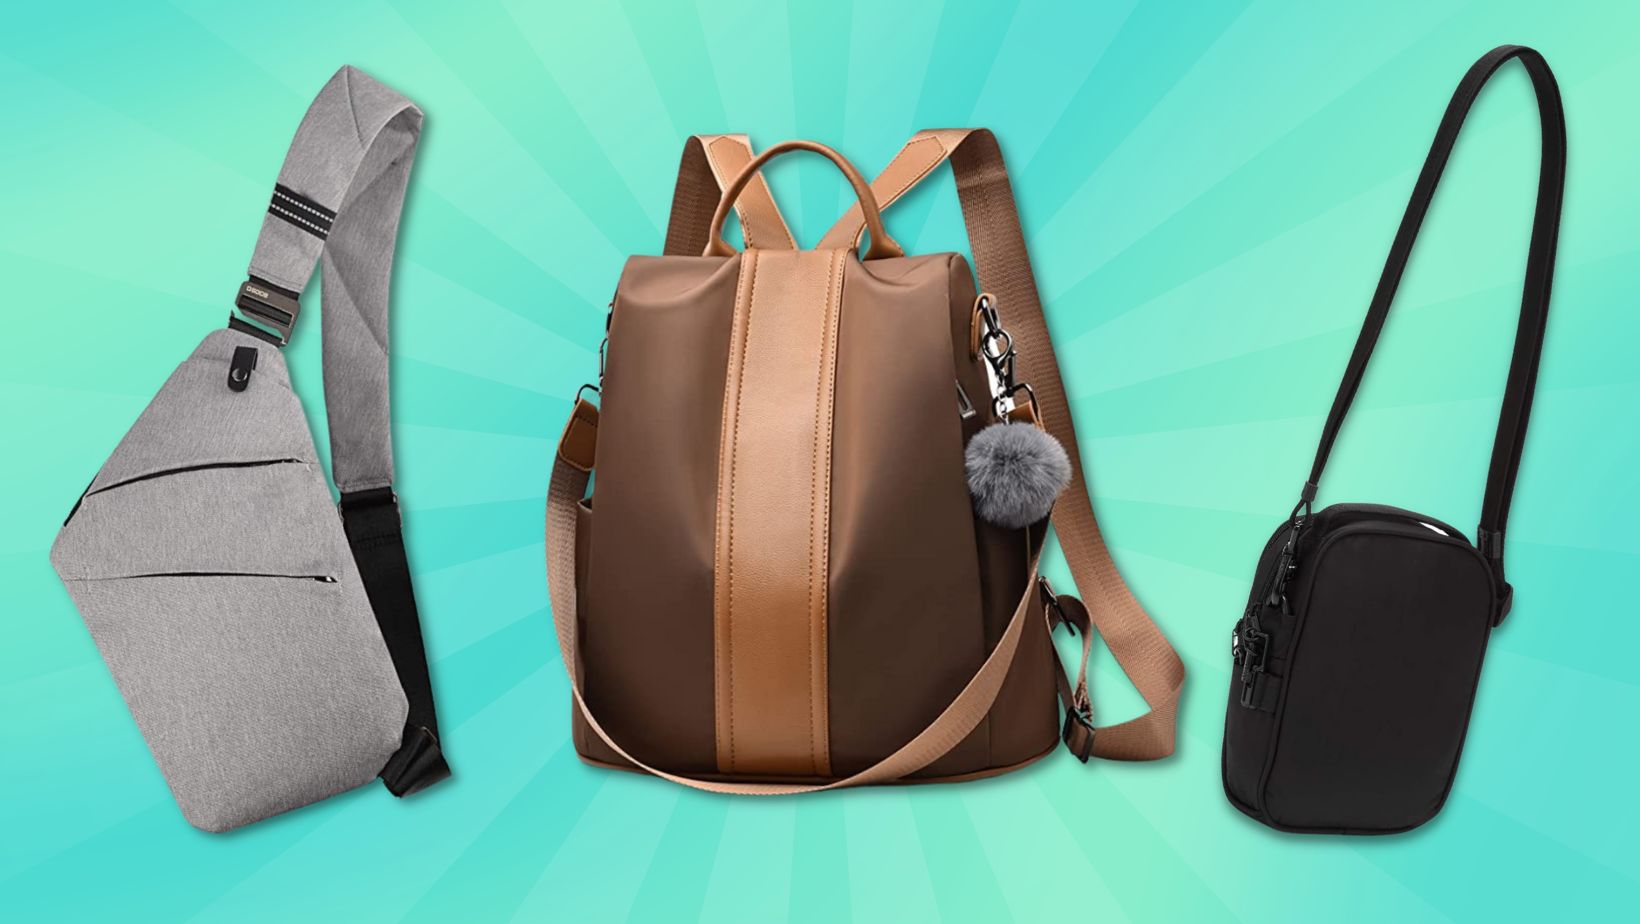 Travel Fashion Girl - While an anti-theft purse isn't necessary for travel,  many women feel more comfortable using one to protect their valuables. 👜  Read on to learn more... https://www.travelfashiongirl.com/top-5-anti-theft-travel-bags-for-women-best  ...